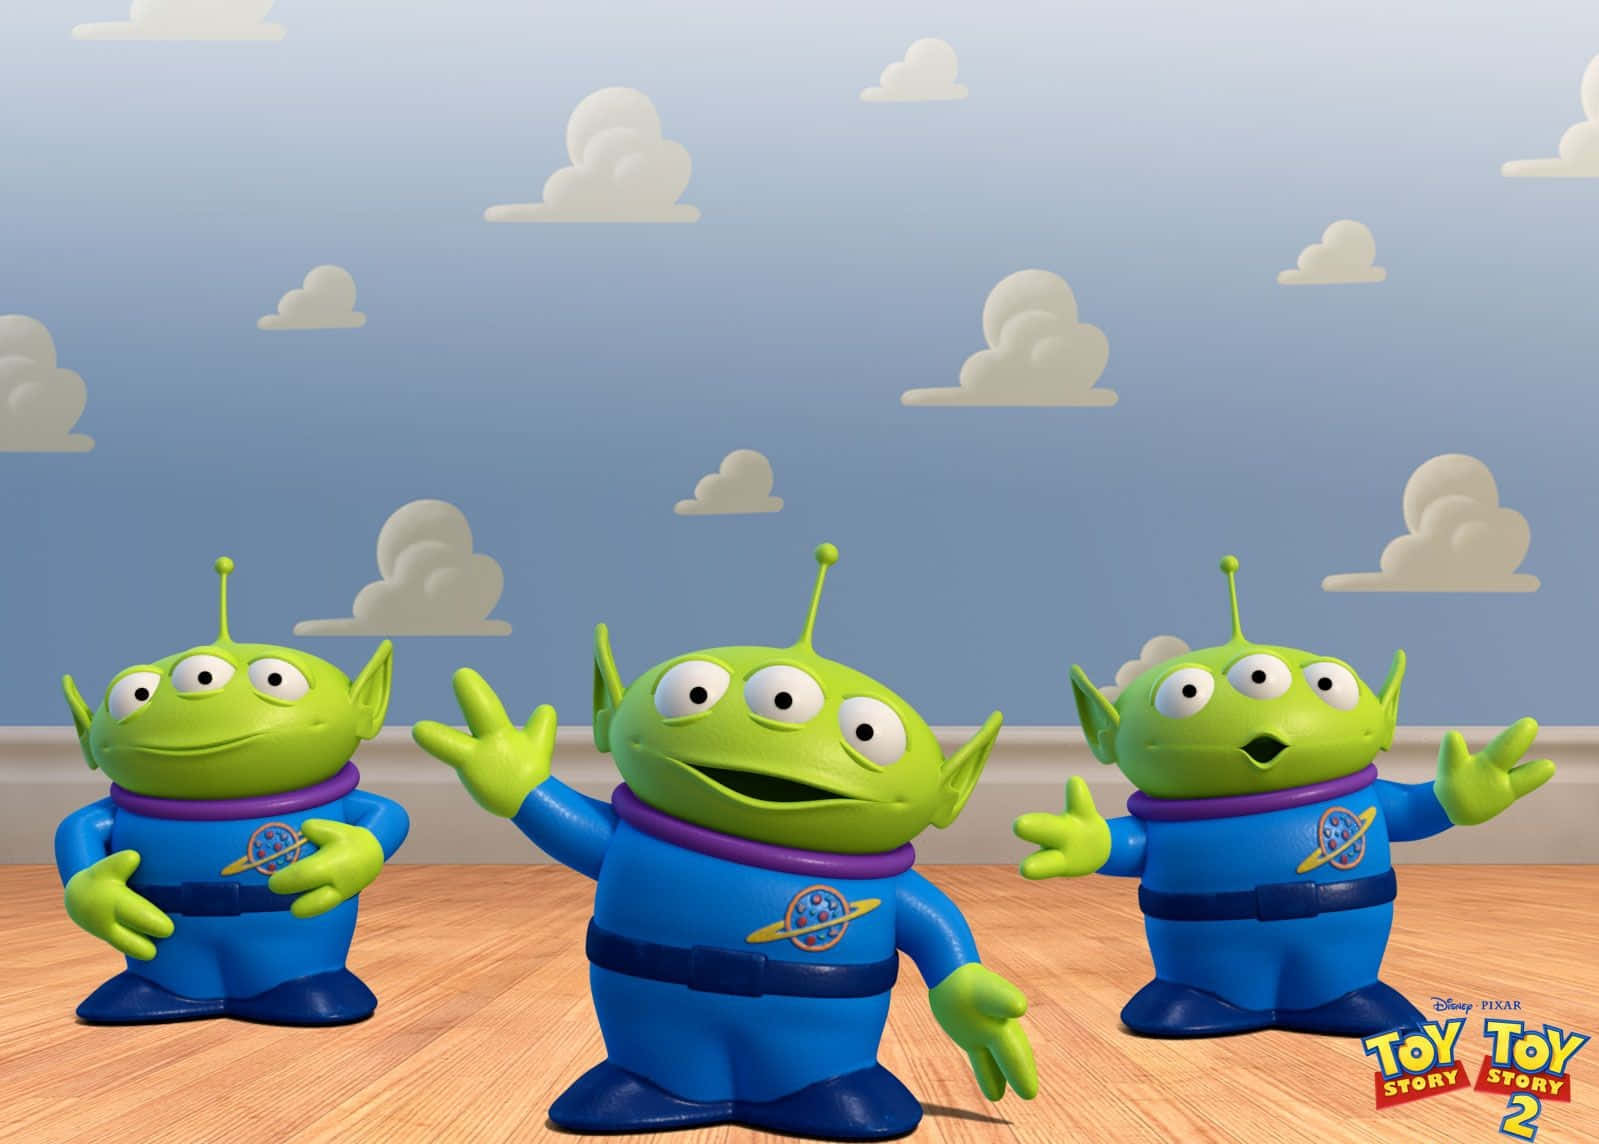 Explore the sky with Toy Story's Cloud Wallpaper